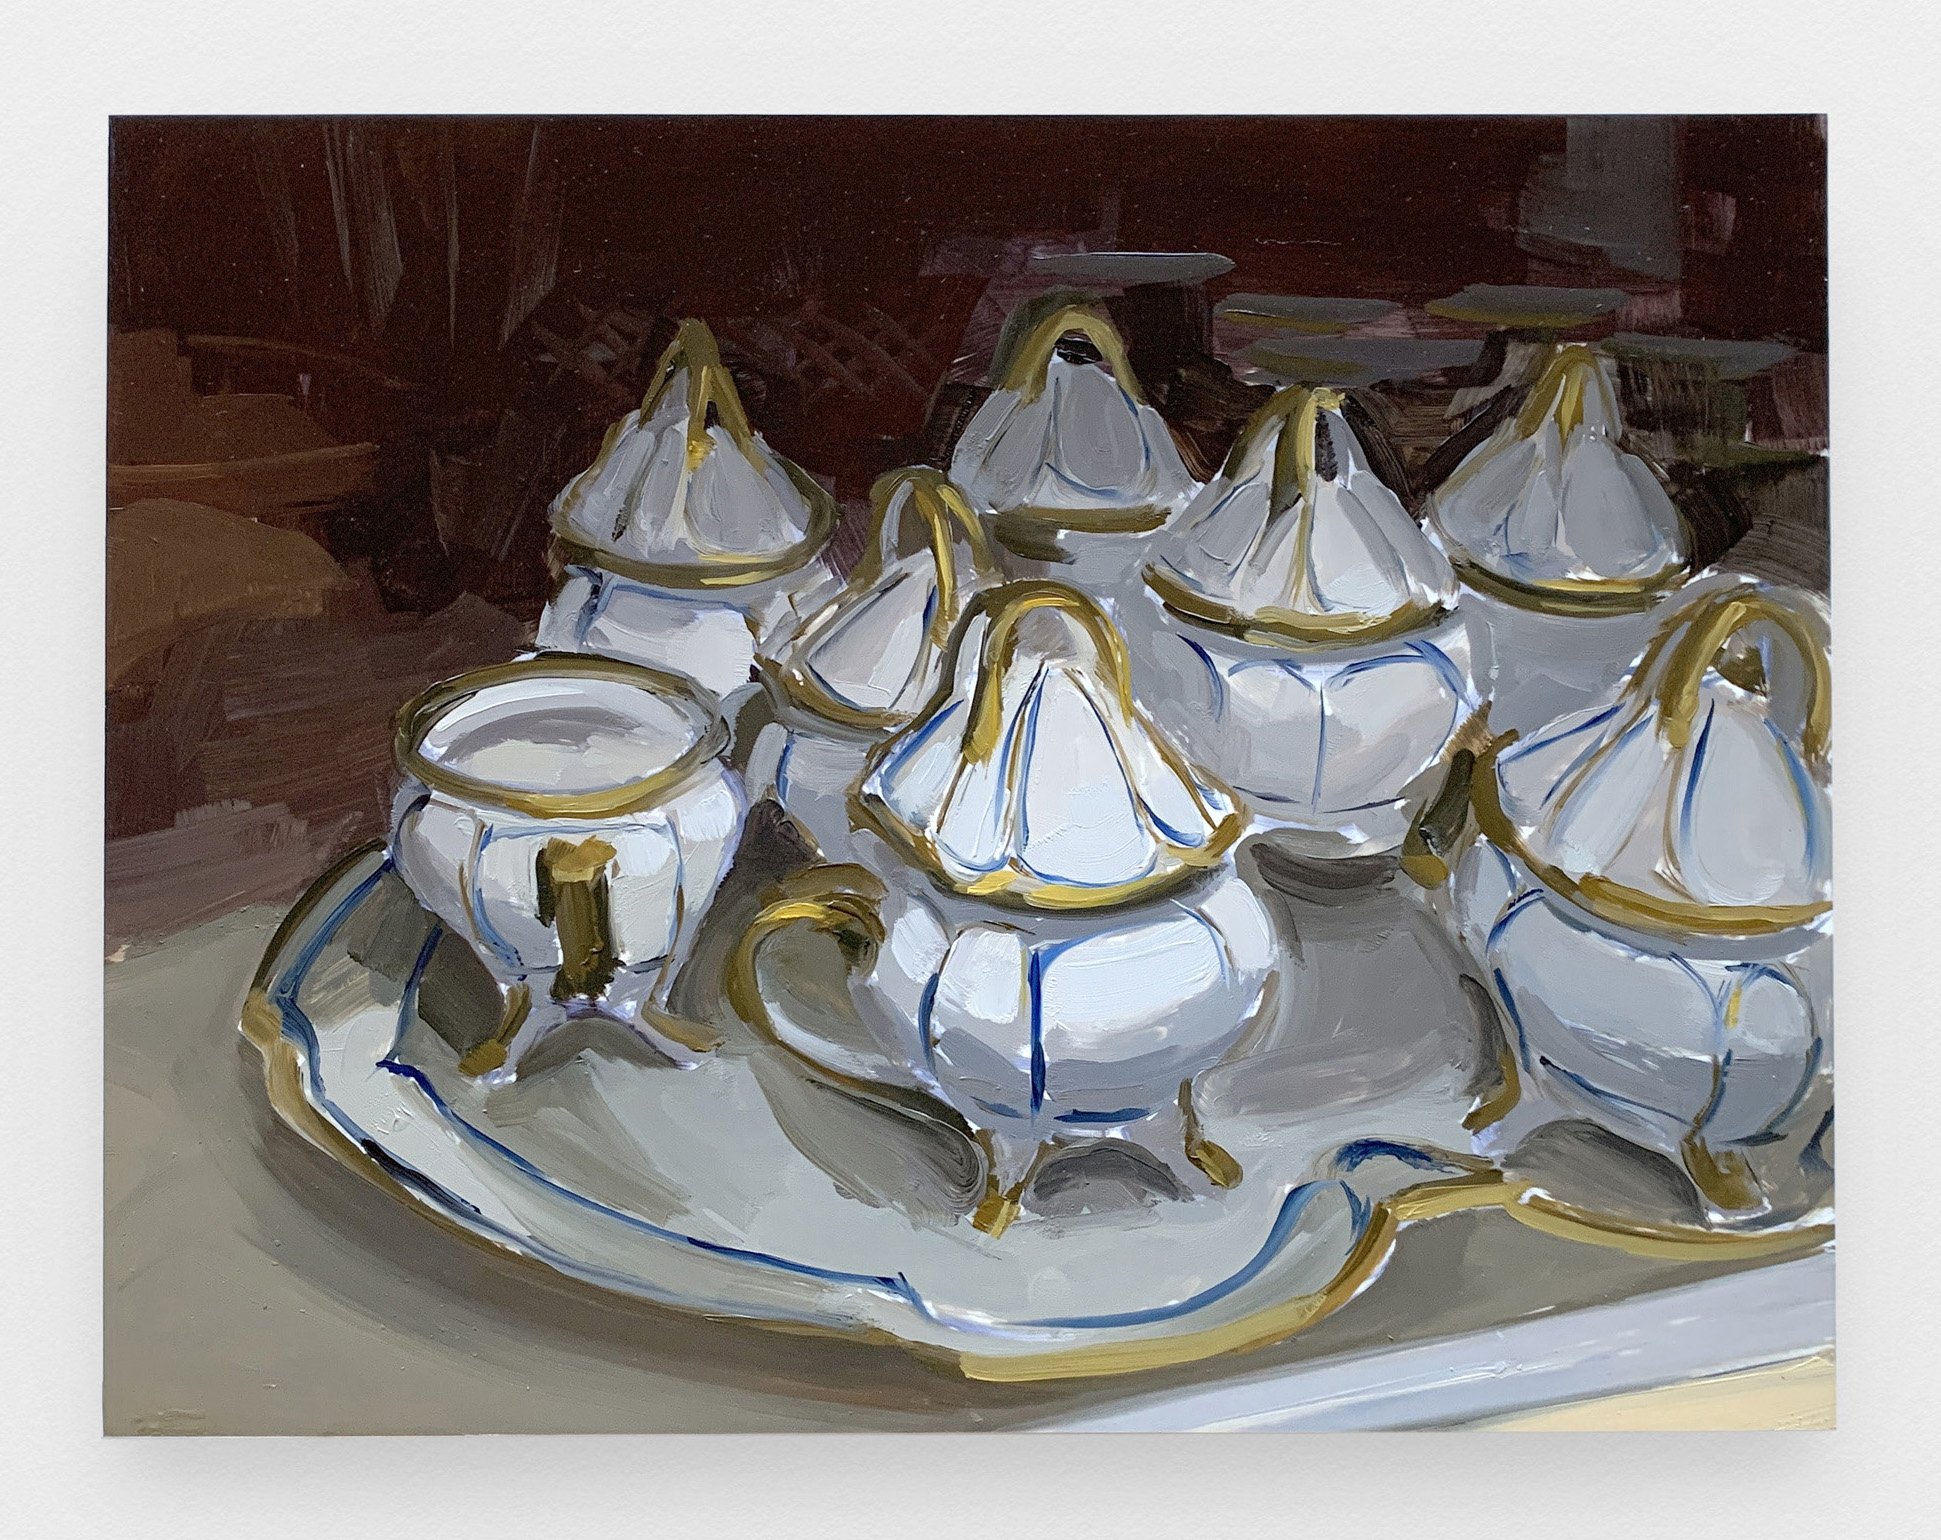  Carrie Mae Smith Pot De Crème Set 2021 Oil on Mylar mounted on panel 13h x 17w in 33.02h x 43.18w cm 